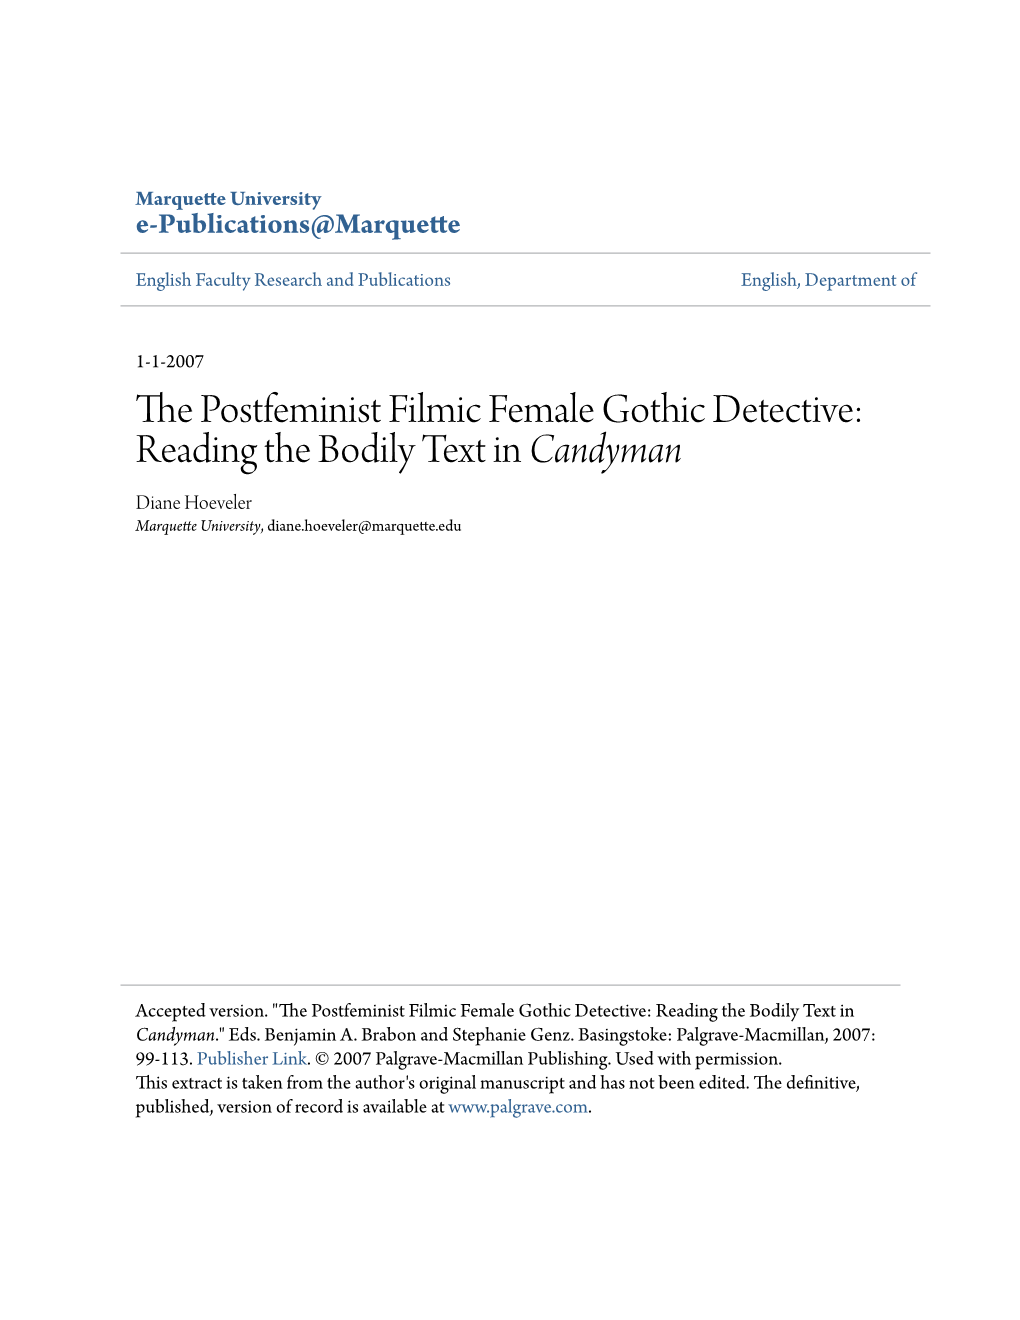 The Postfeminist Filmic Female Gothic Detective: Reading the Bodily Text in Candyman and Gothika”